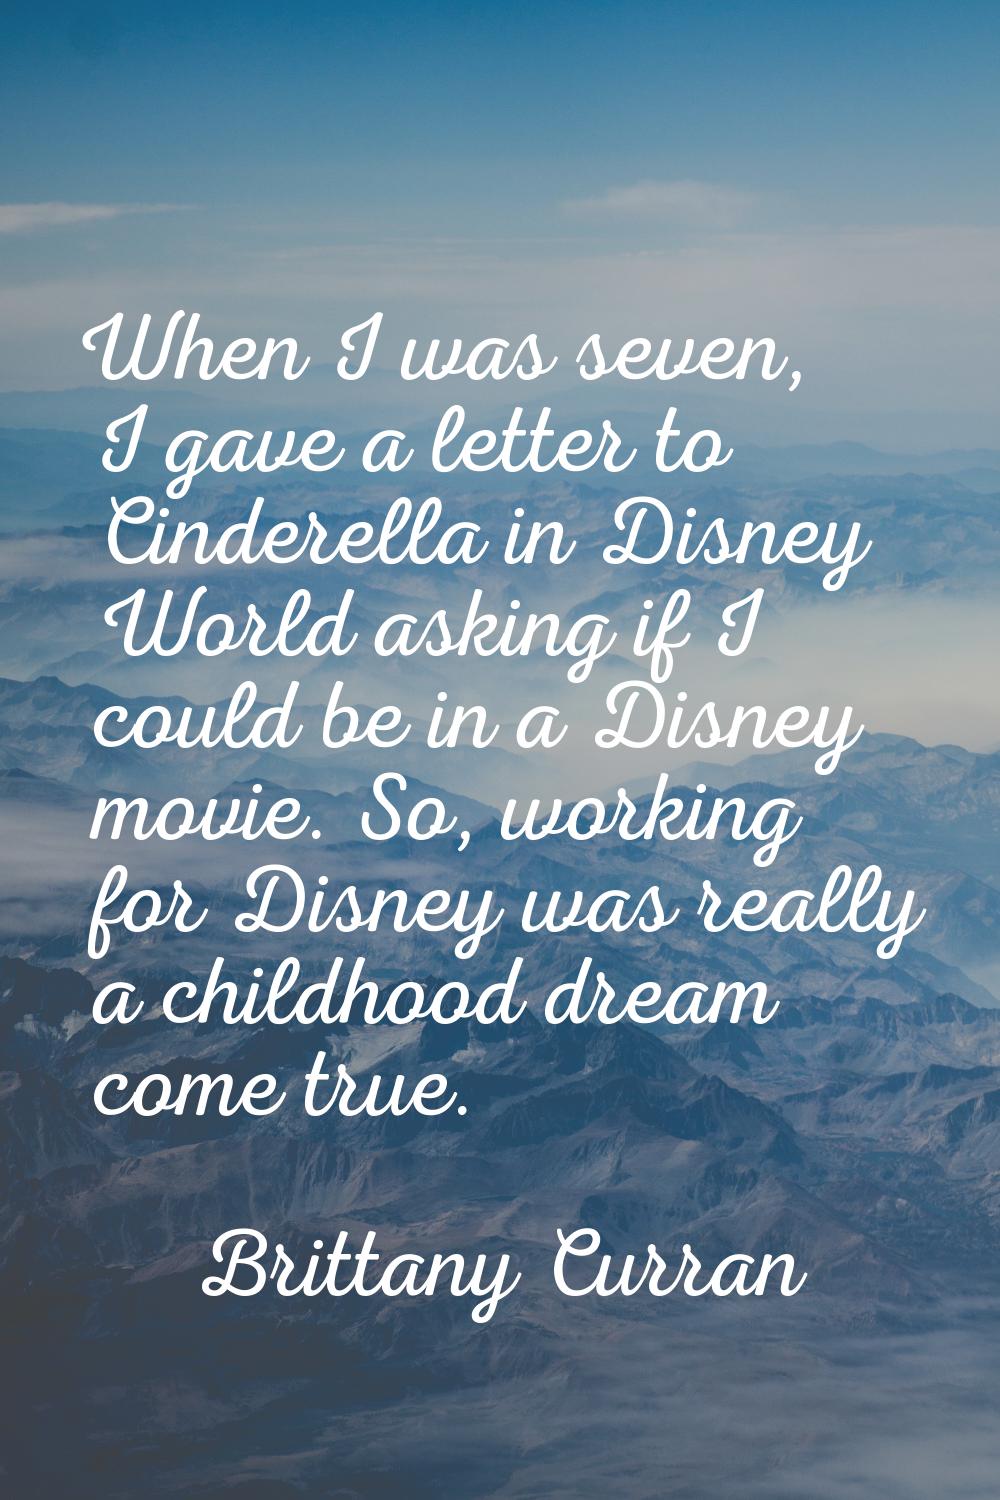 When I was seven, I gave a letter to Cinderella in Disney World asking if I could be in a Disney mo